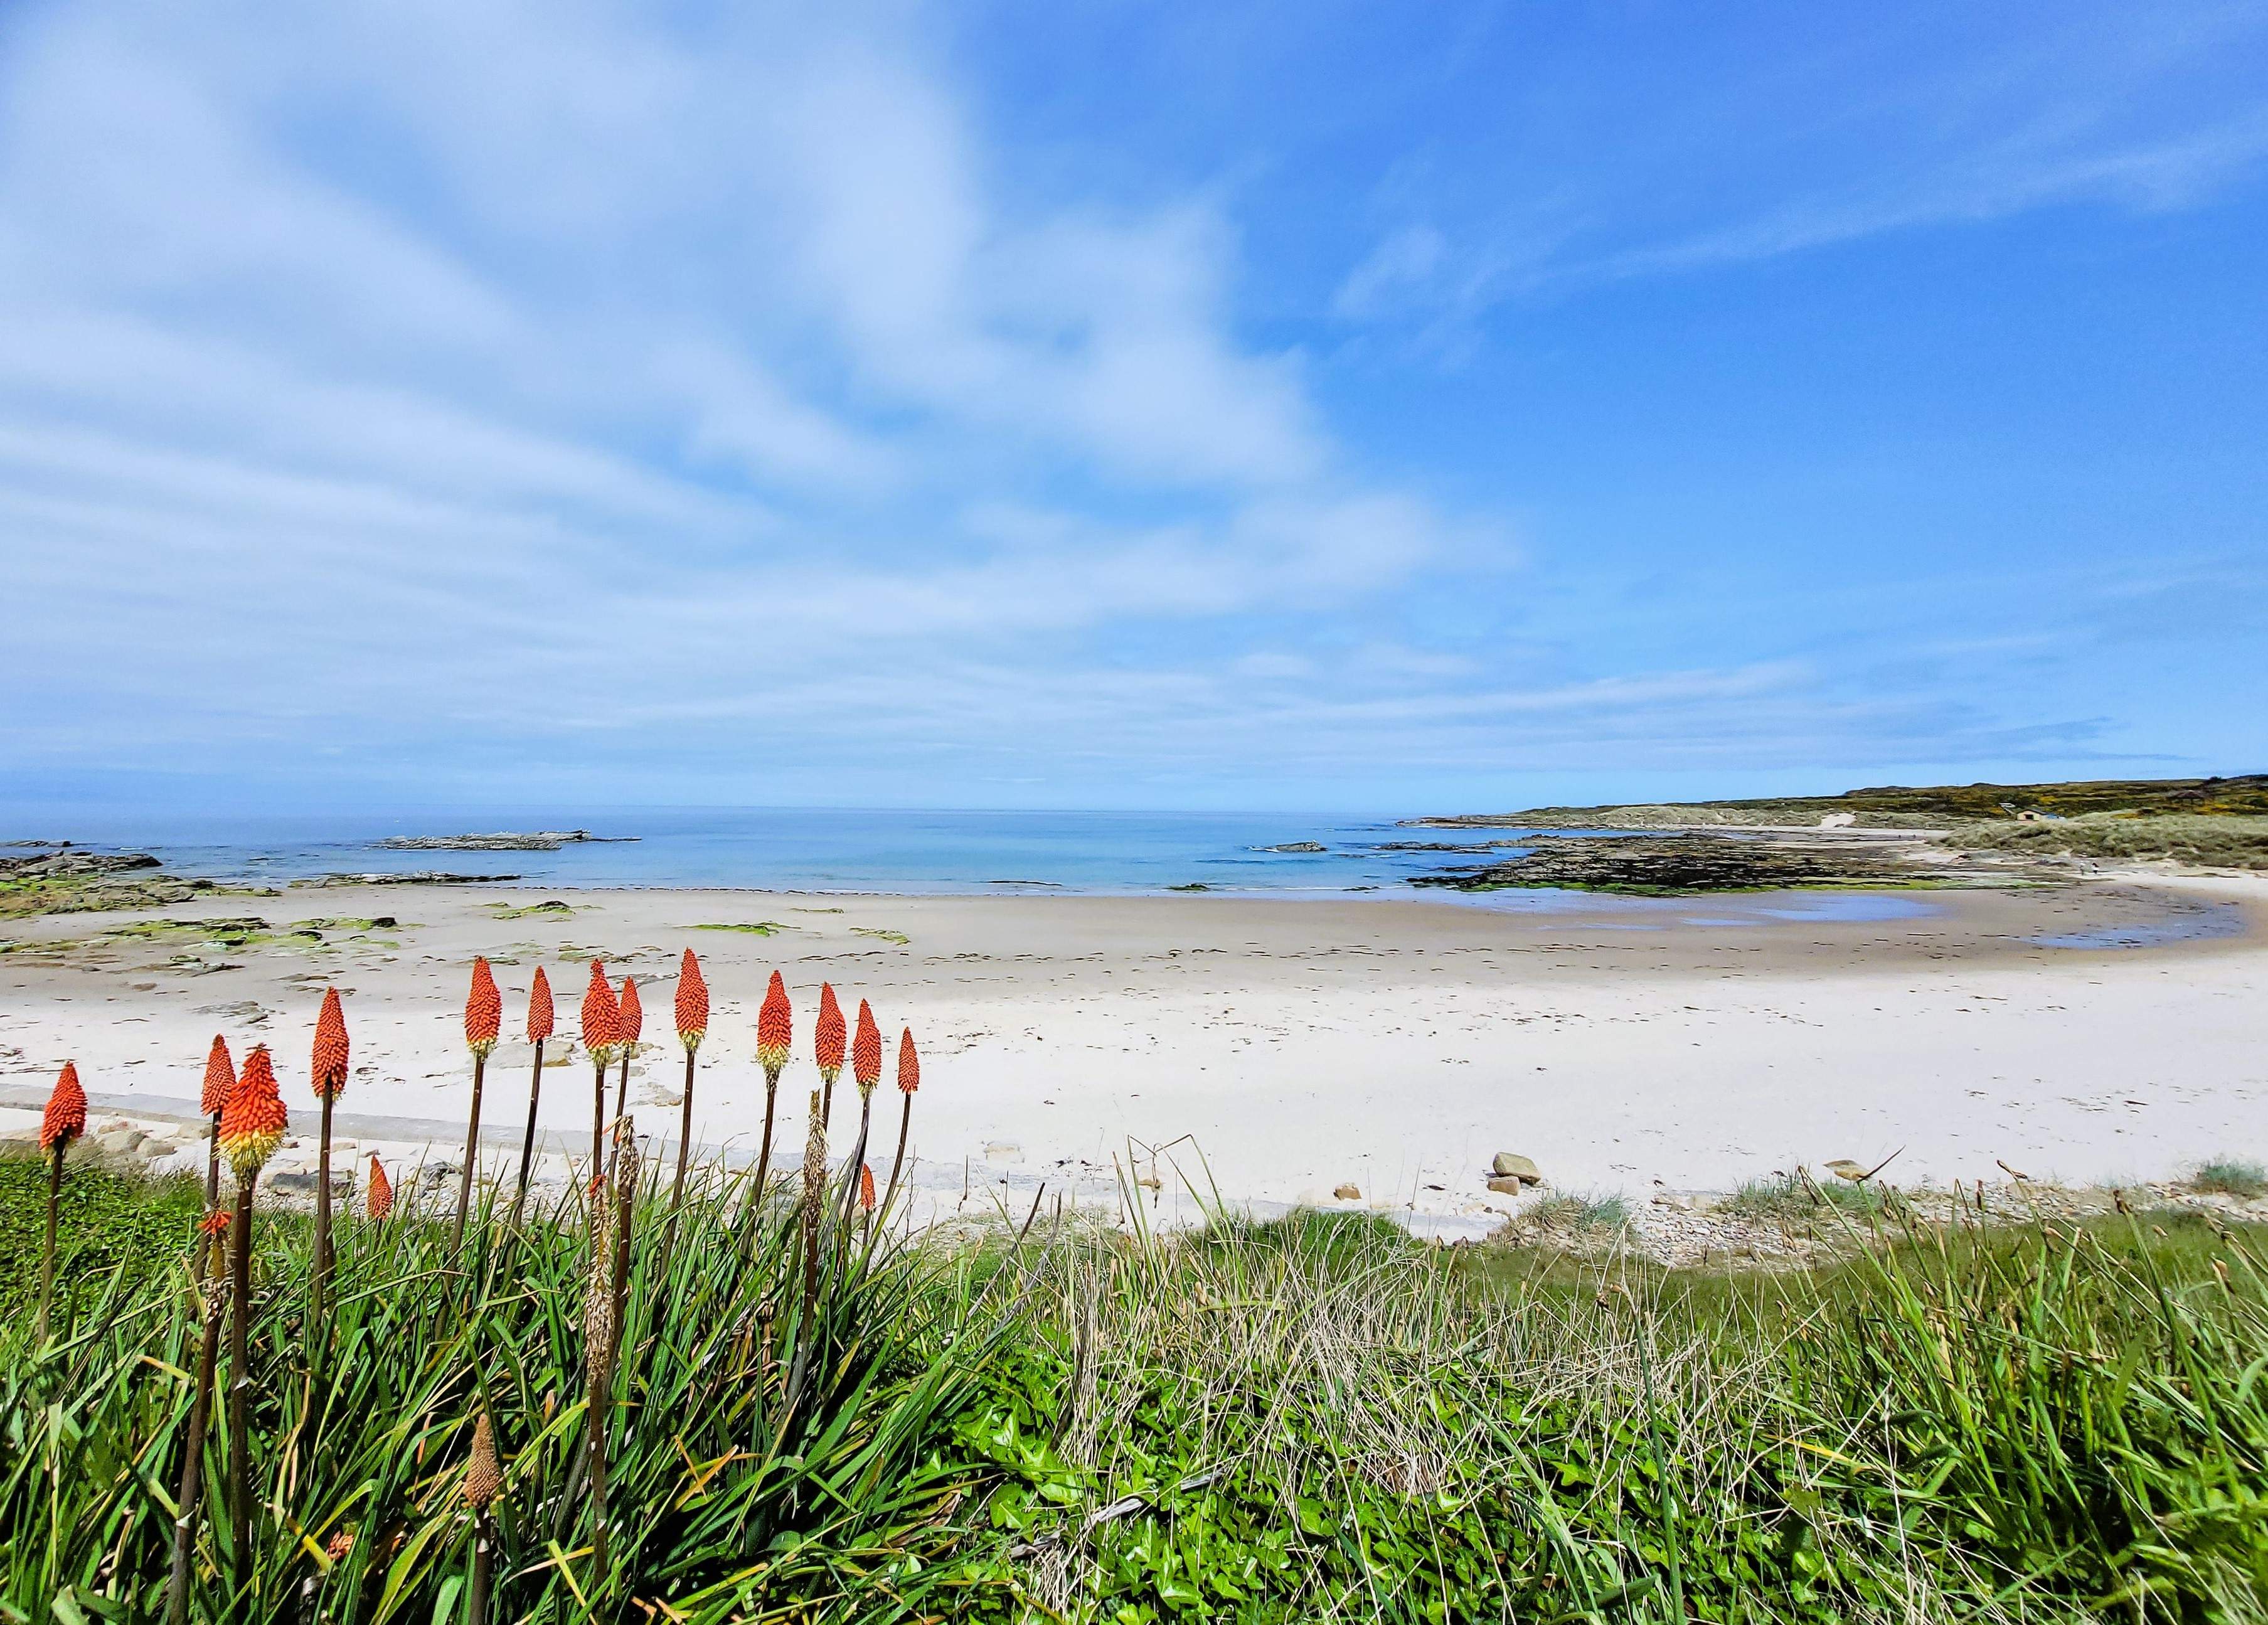 Just one of the stunning sandy beaches at Hopeman